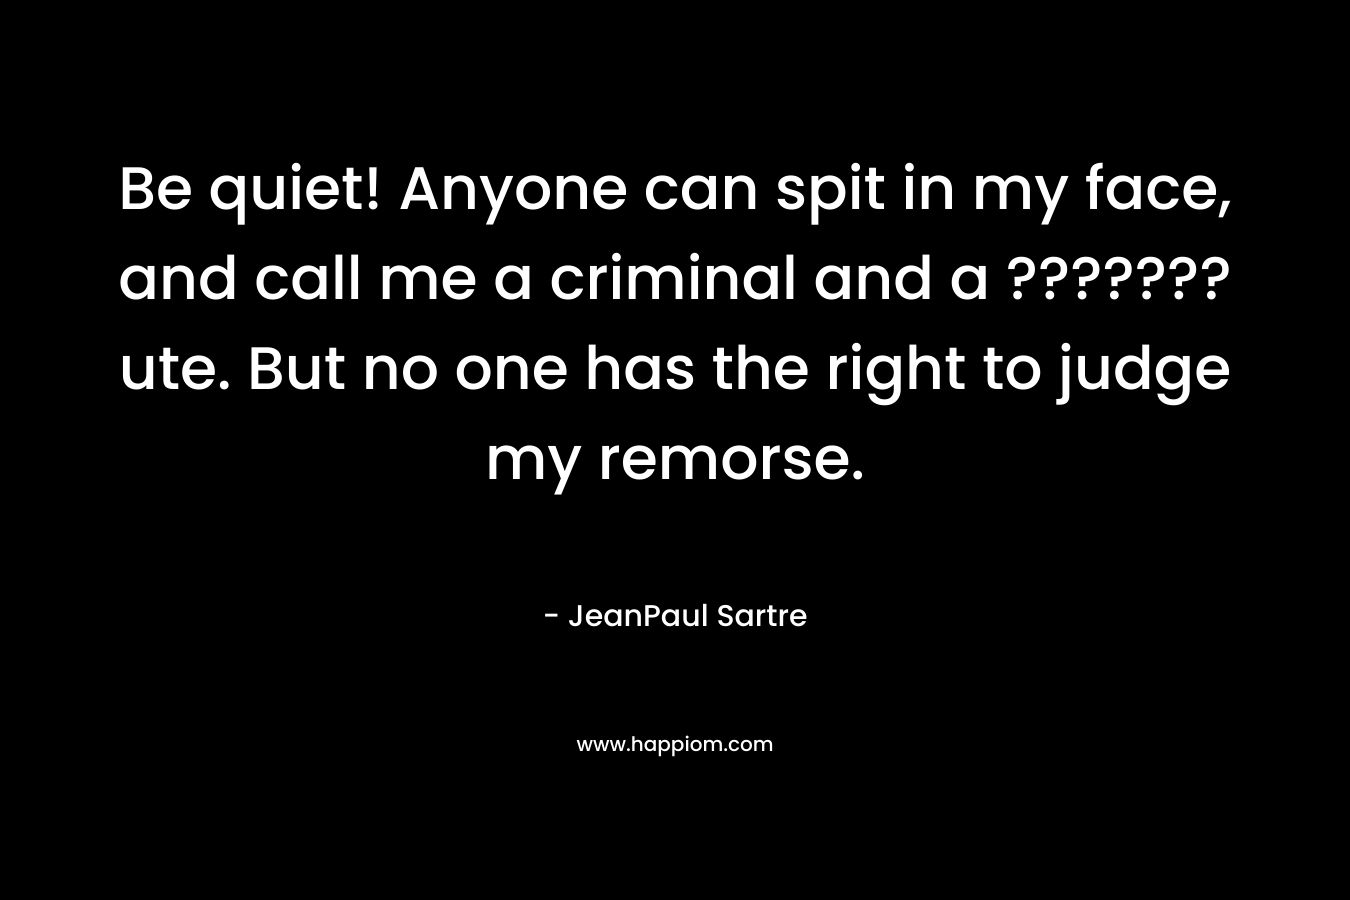 Be quiet! Anyone can spit in my face, and call me a criminal and a ???????ute. But no one has the right to judge my remorse. – JeanPaul Sartre